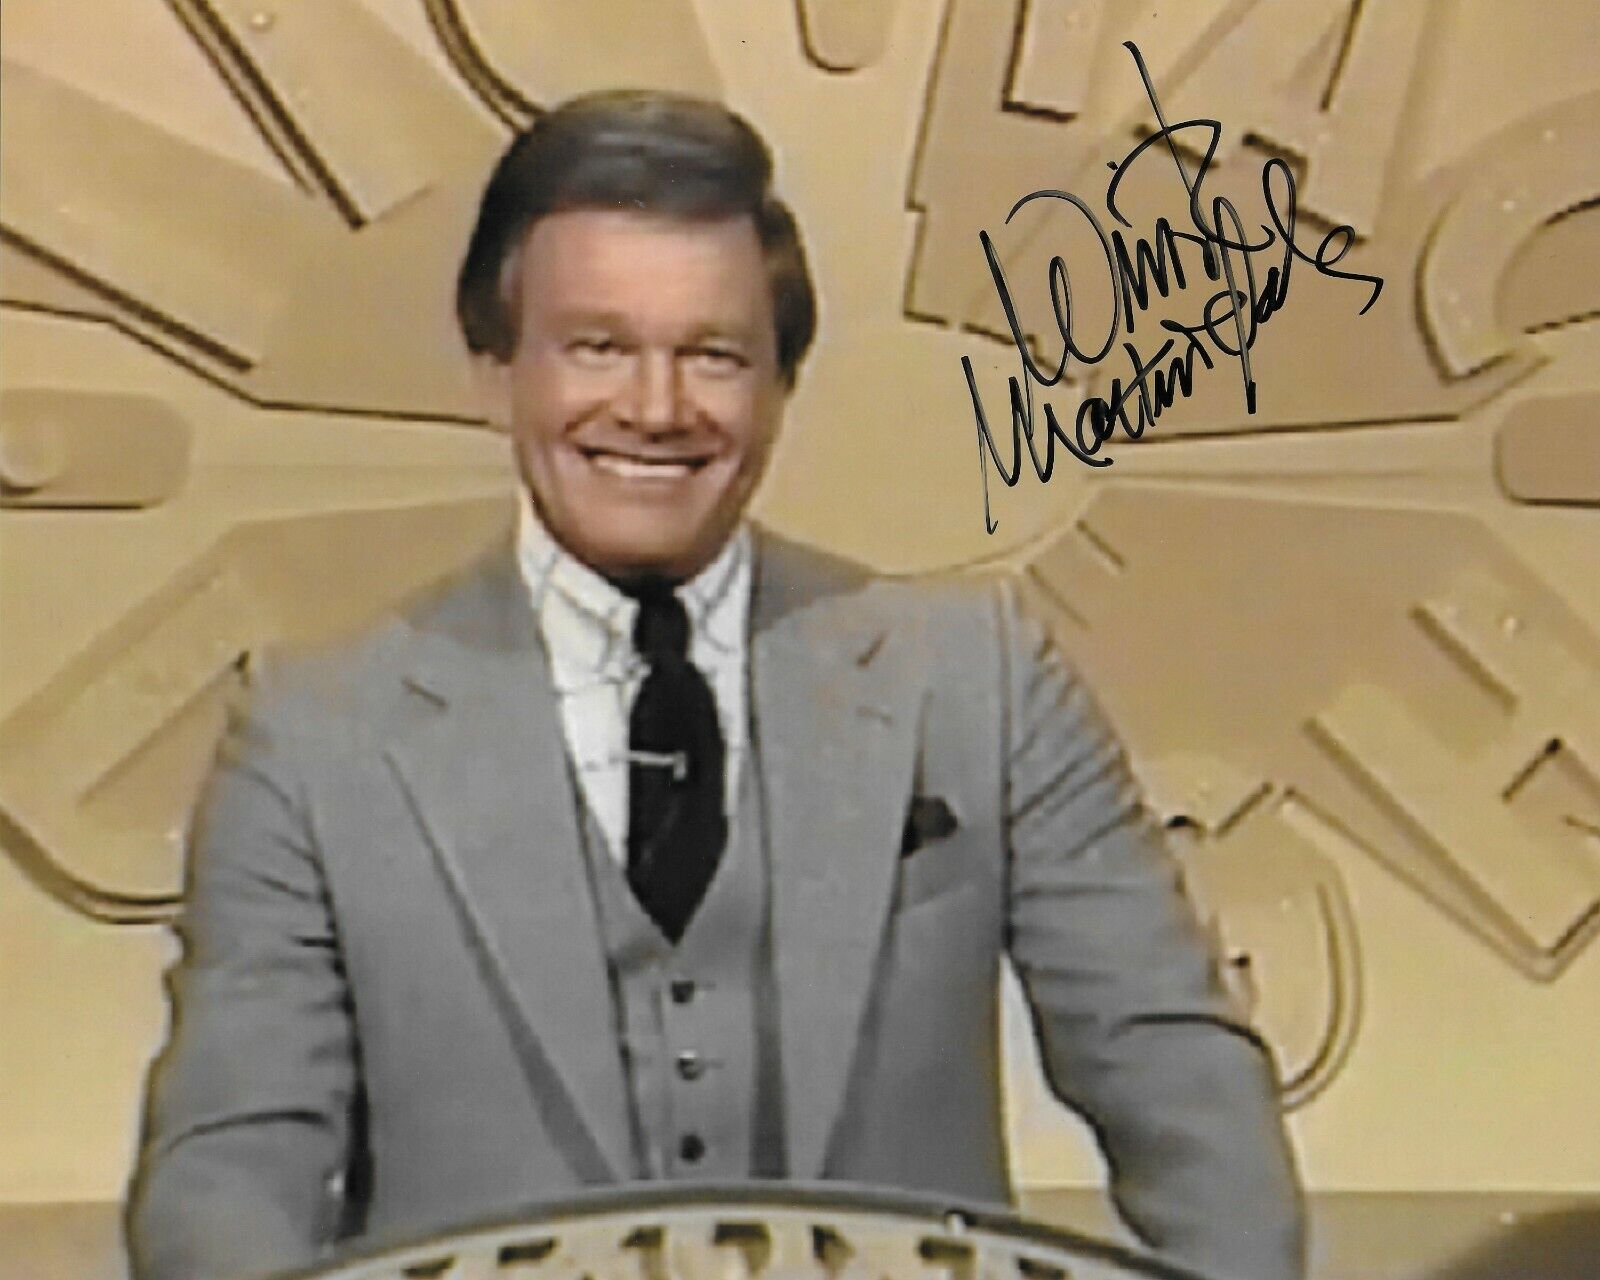 Wink Martindale Original Autographed 8x10 Photo Poster painting #2